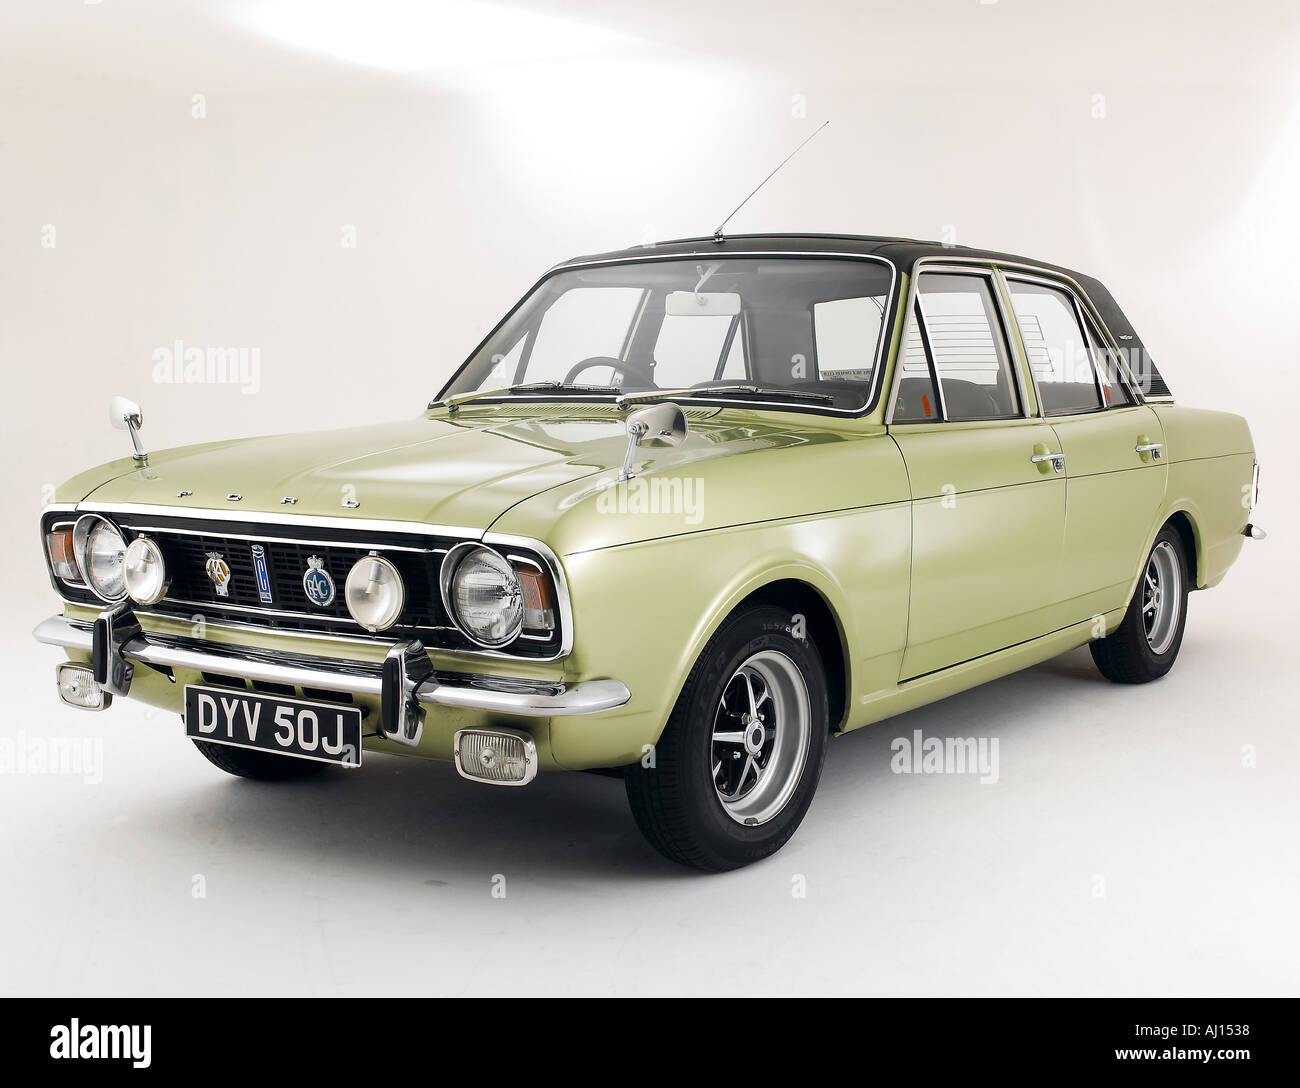 Ford Cortina 70s High Resolution Stock Photography and Images - Alamy